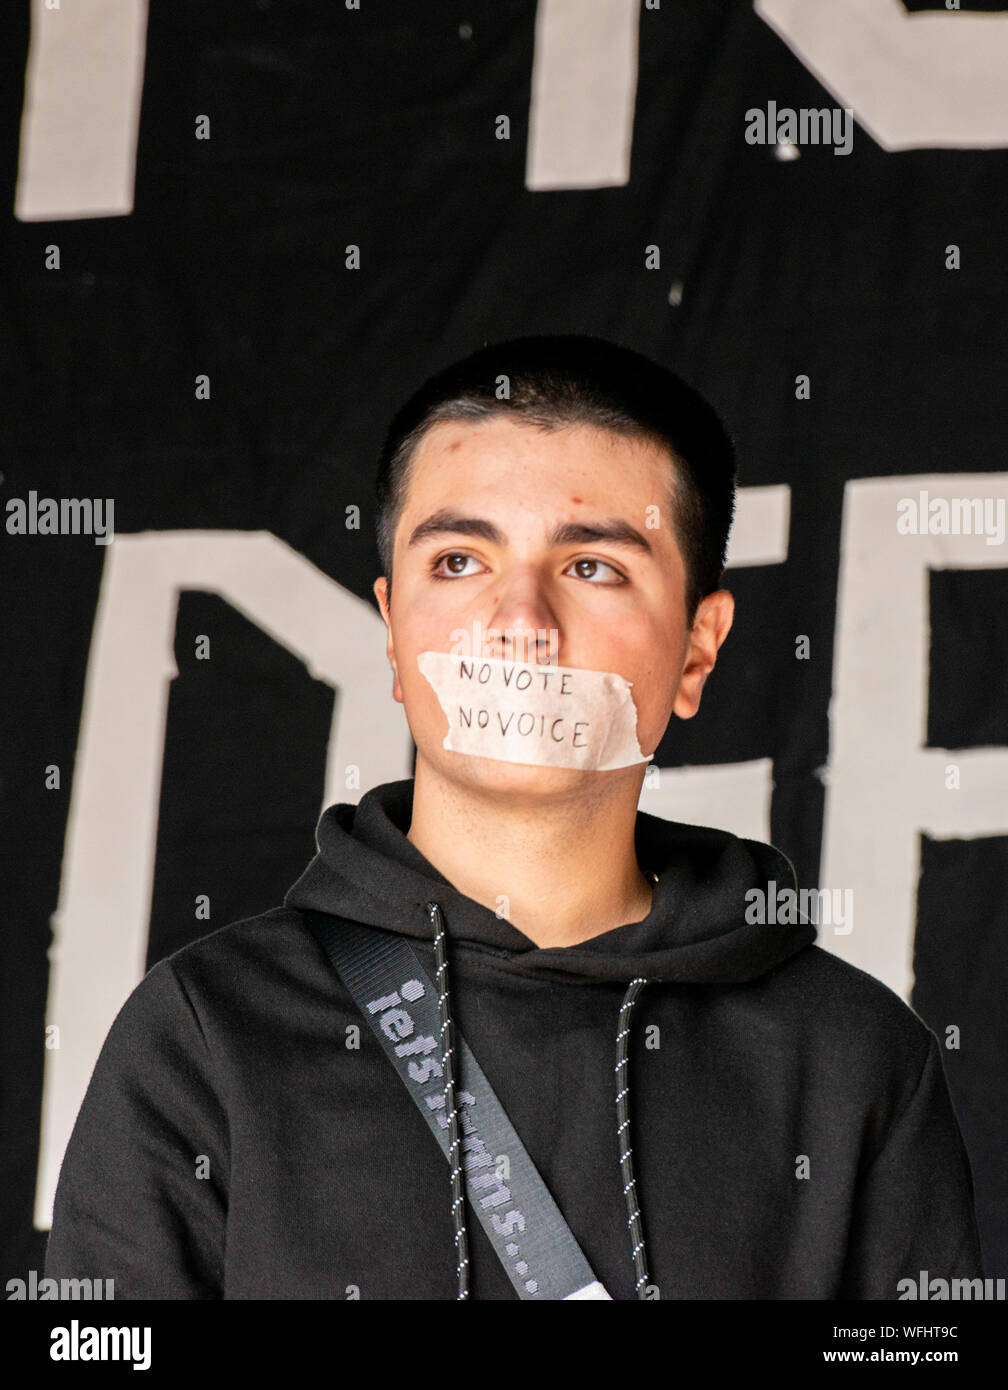 Young protester with tape on his mouth saying No Vote No Voice at ‘Stop the Coup, Defend Democracy’ protest outside Downing Street, Central London, UK, 31 August 2019 Stock Photo